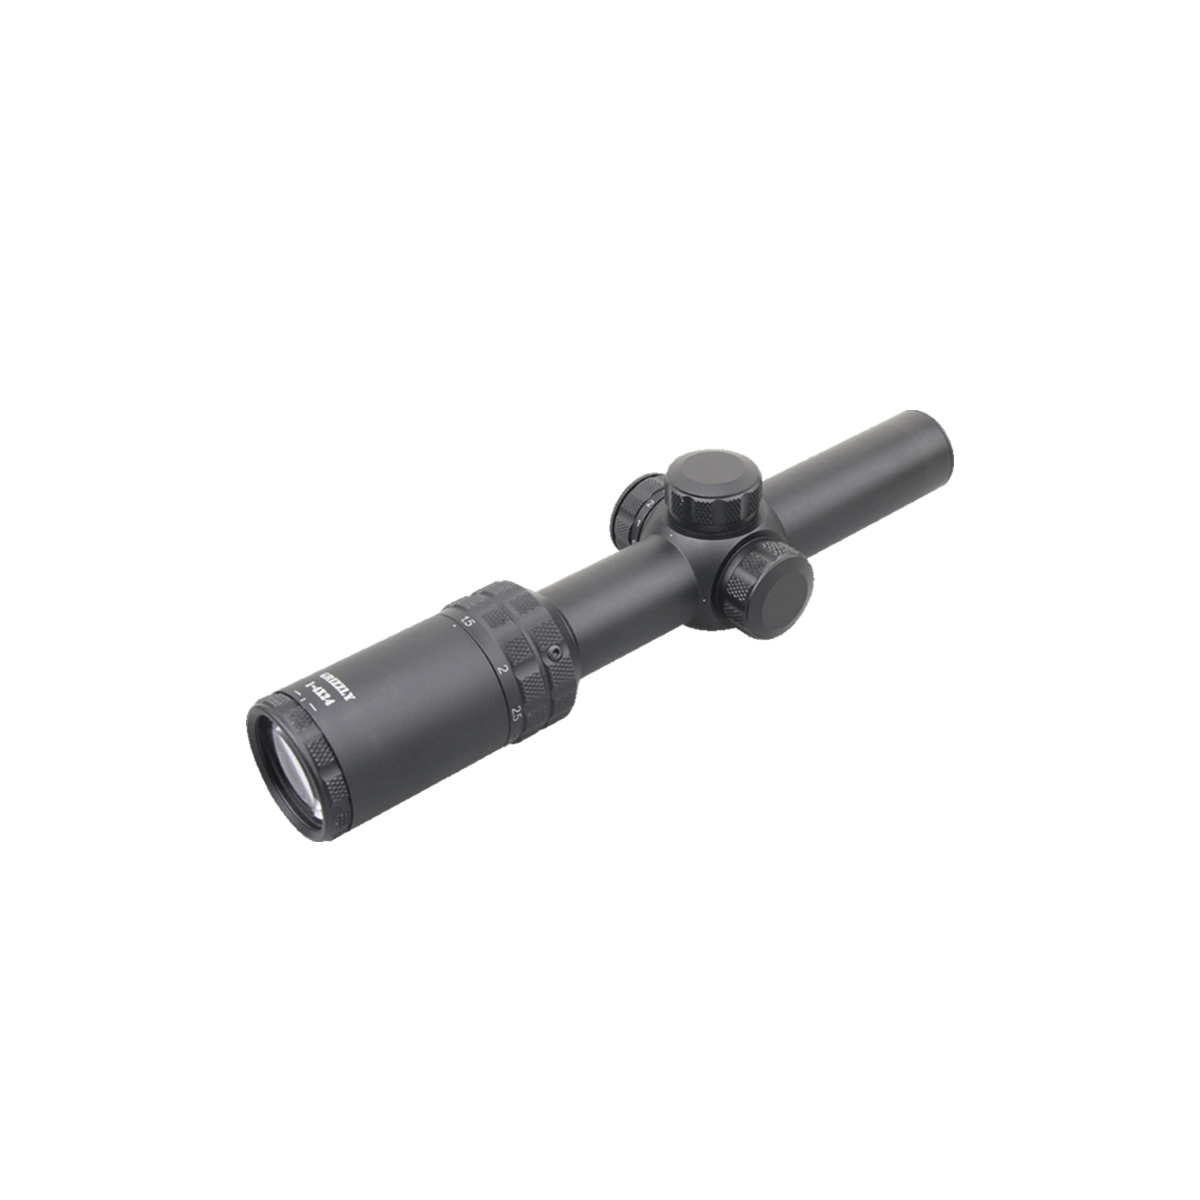 Grizzly 1-4x24 Hunting Riflescope